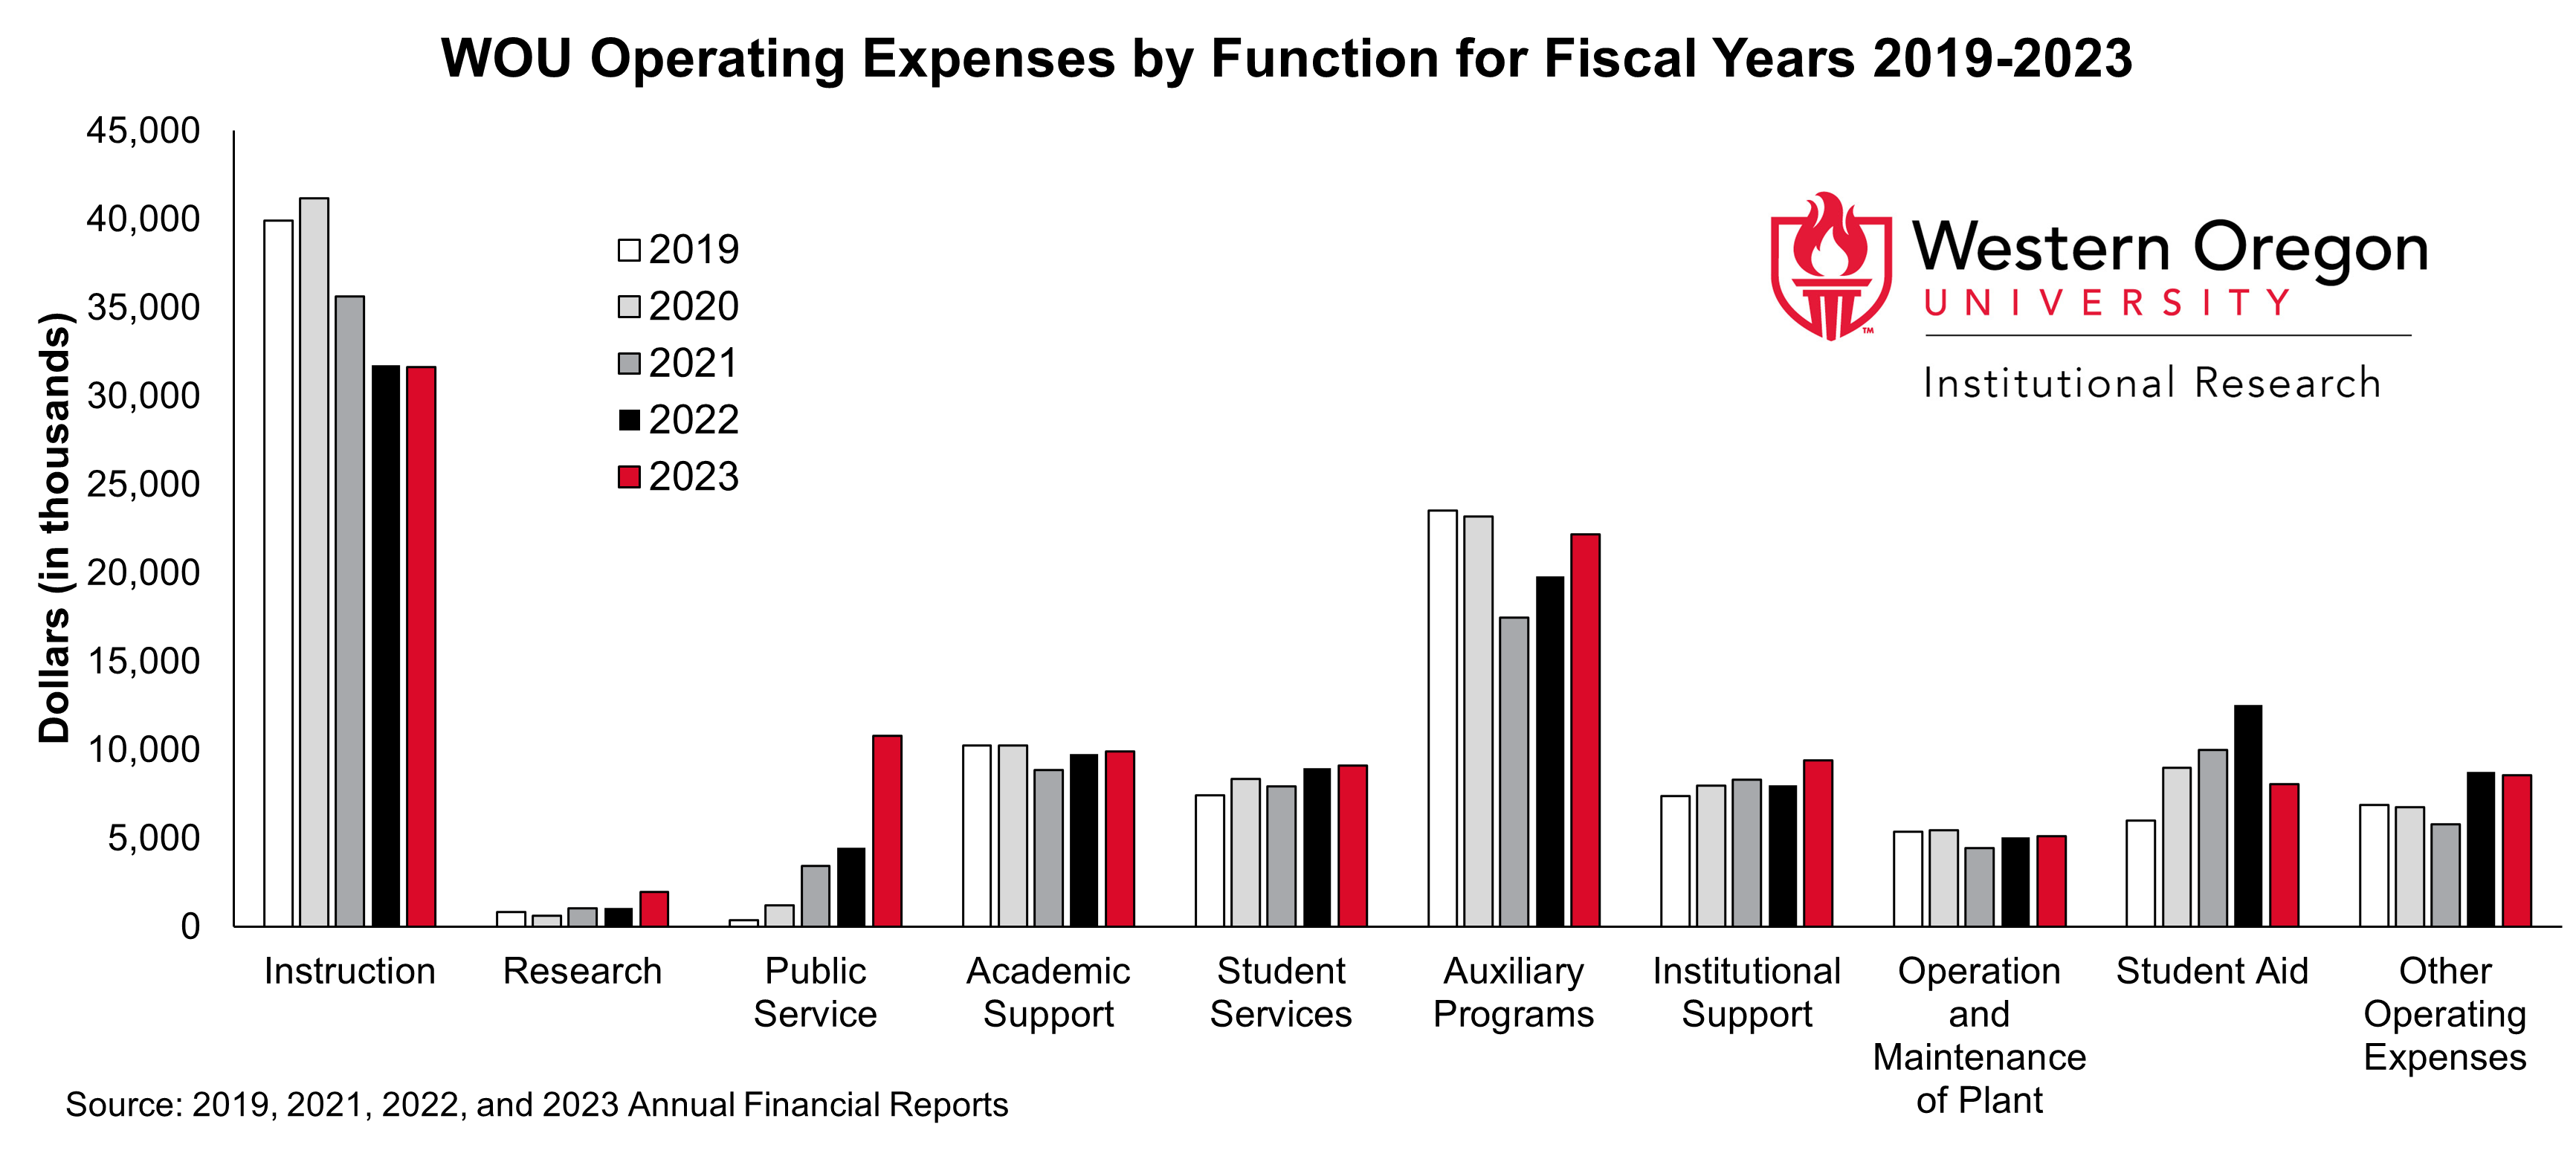 Bar graph of operating expenses at WOU since 2019, broken out by year and function, showing that instruction is the largest expense category, but has been decreasing in recent years.